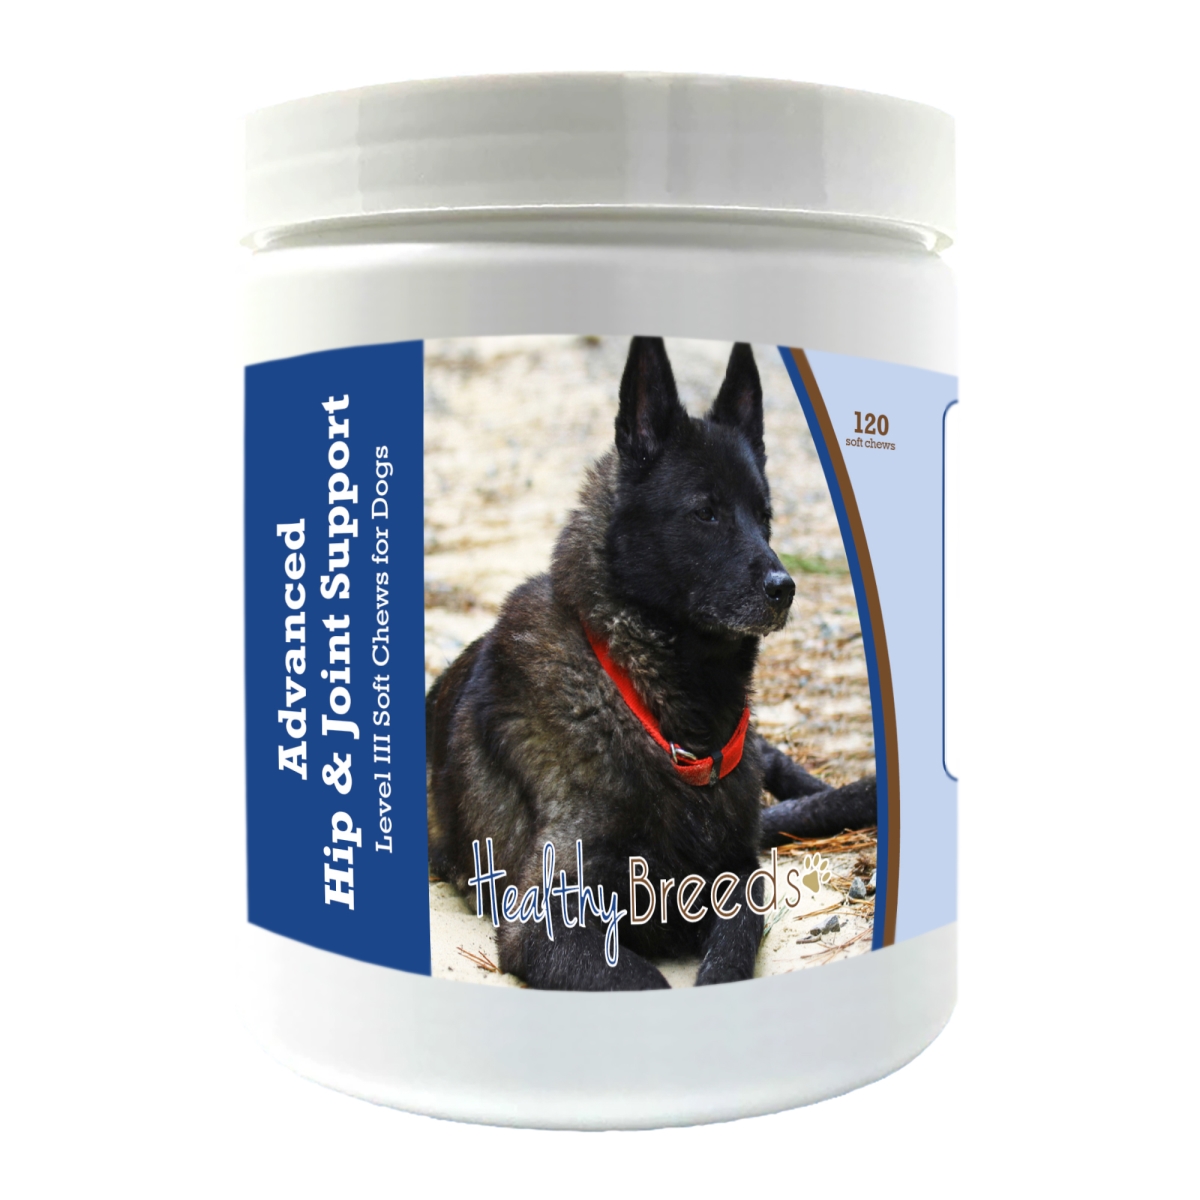 Picture of Healthy Breeds 192959898781 Norwegian Elkhound Advanced Hip & Joint Support Level III Soft Chews for Dogs